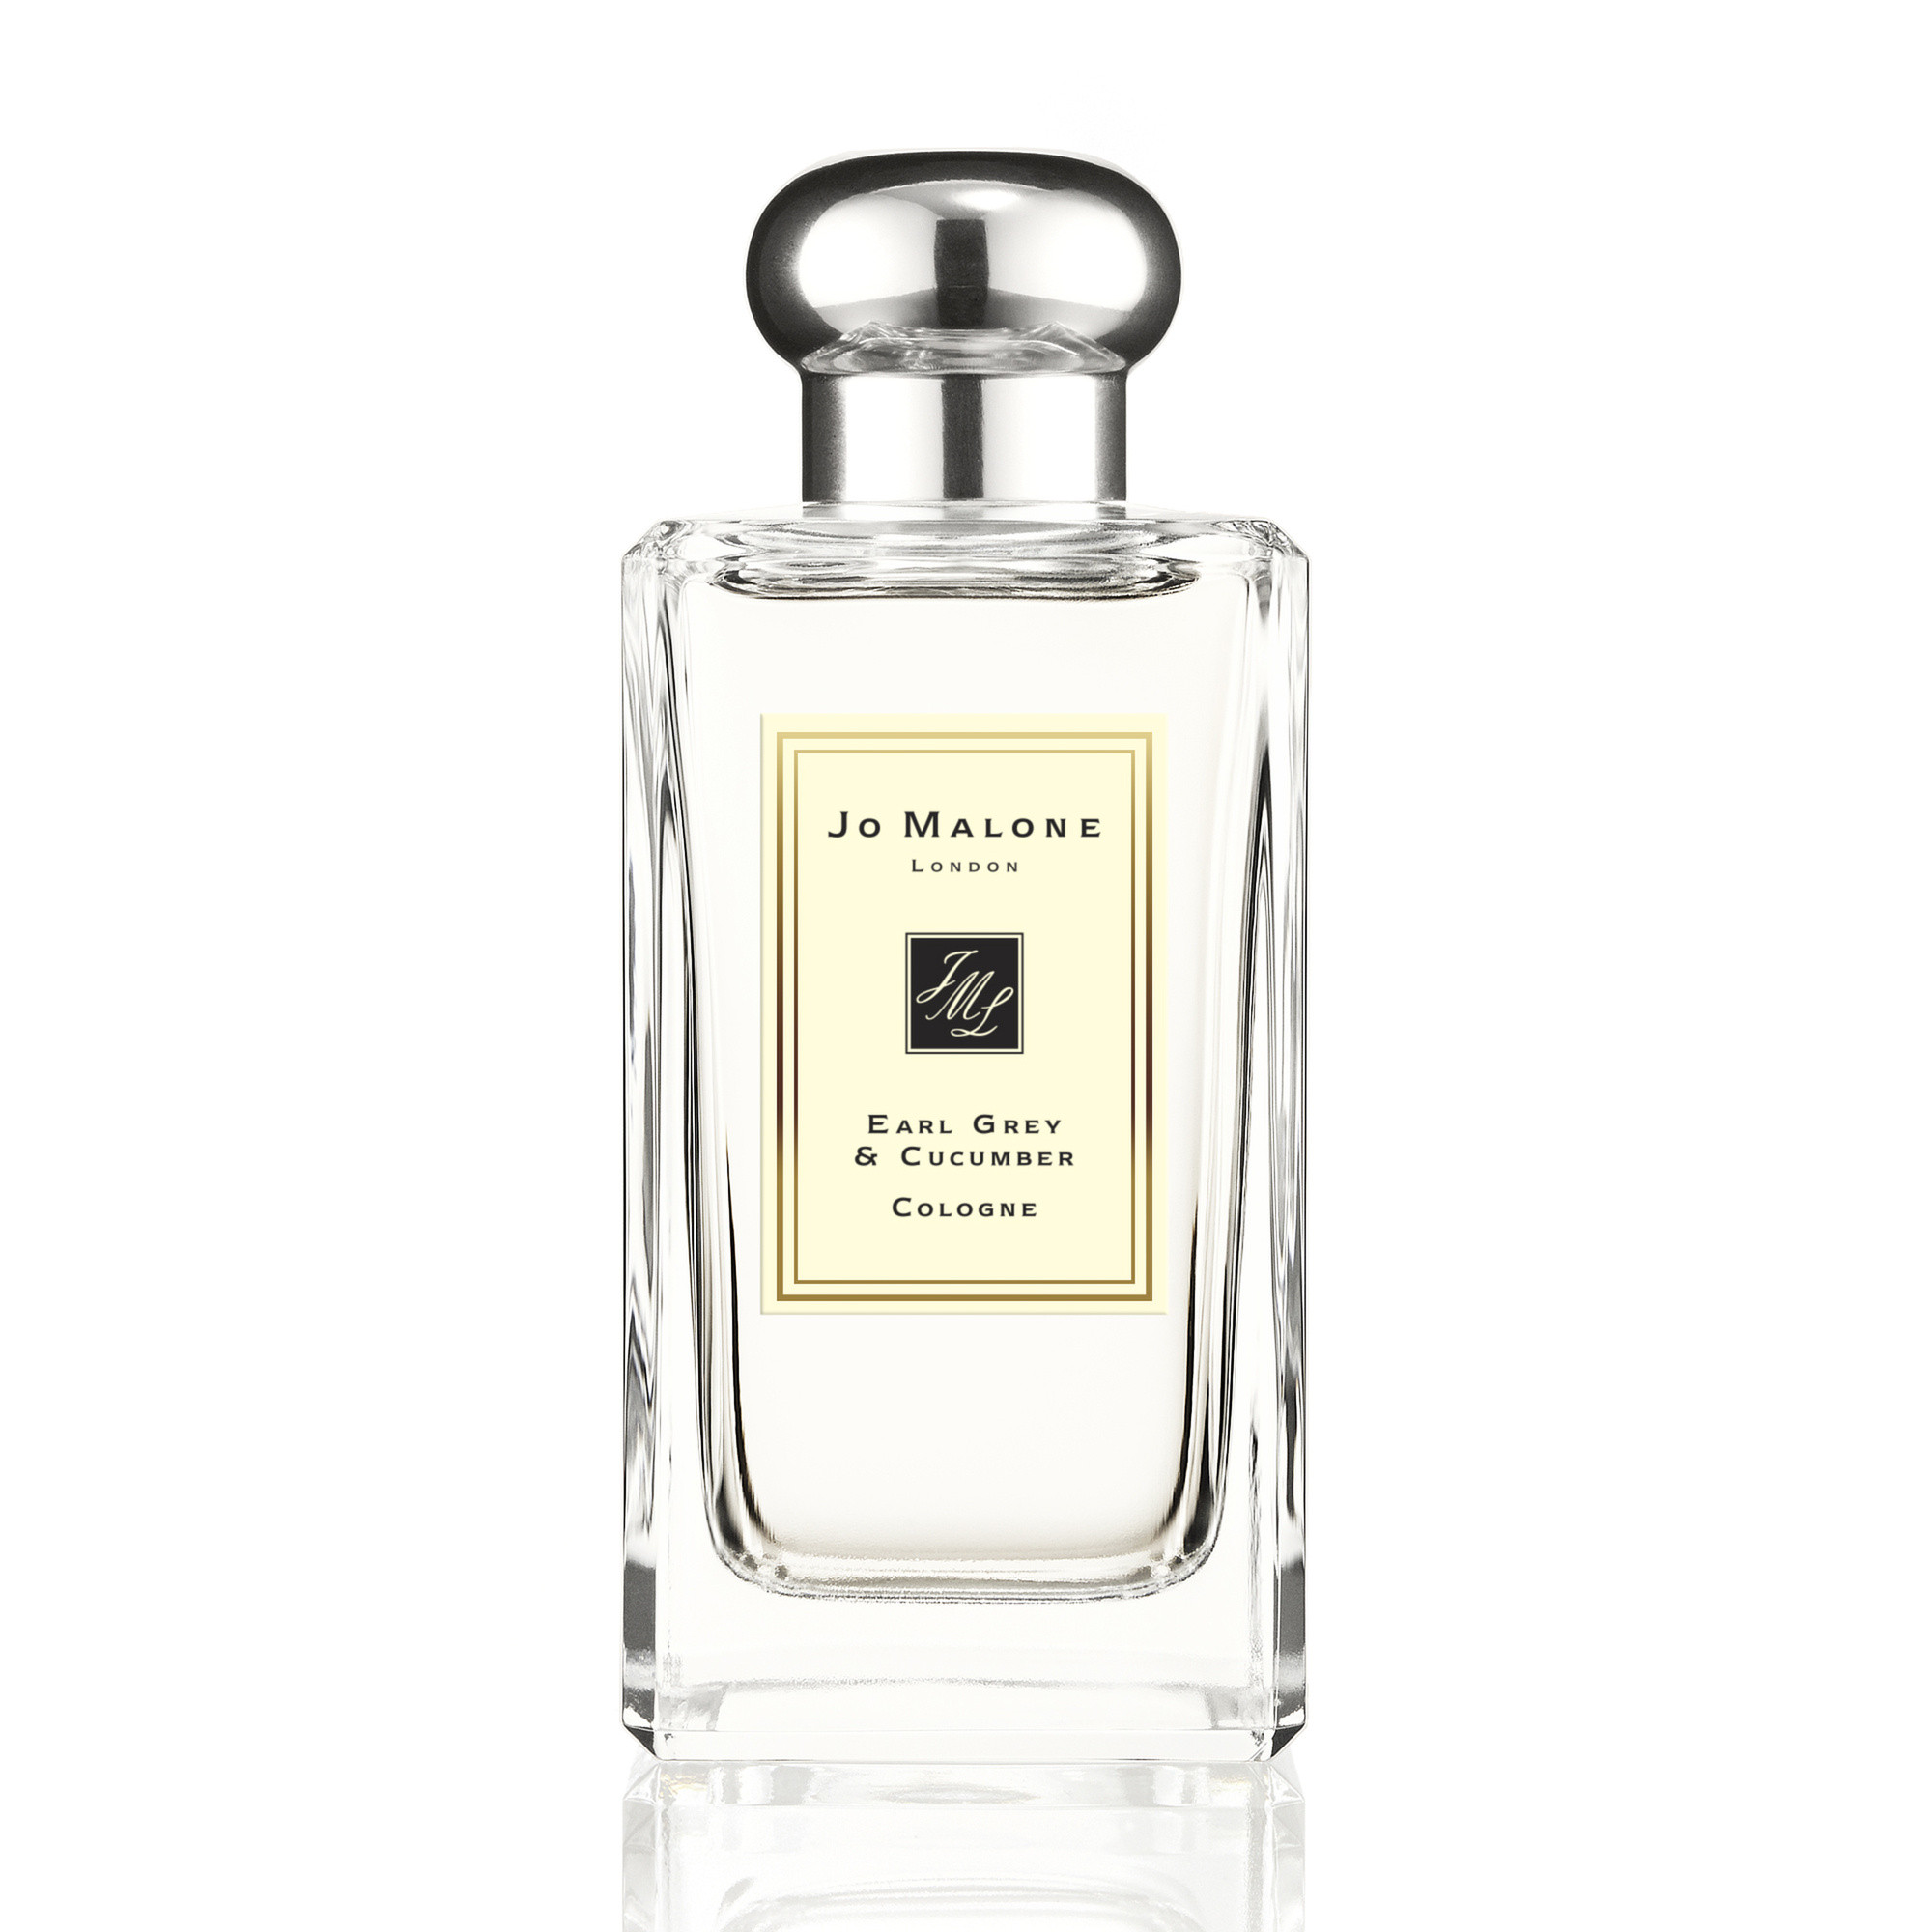 Jo Malone London earl grey & cucumber cologne 100 ml, Beige, large image number 0